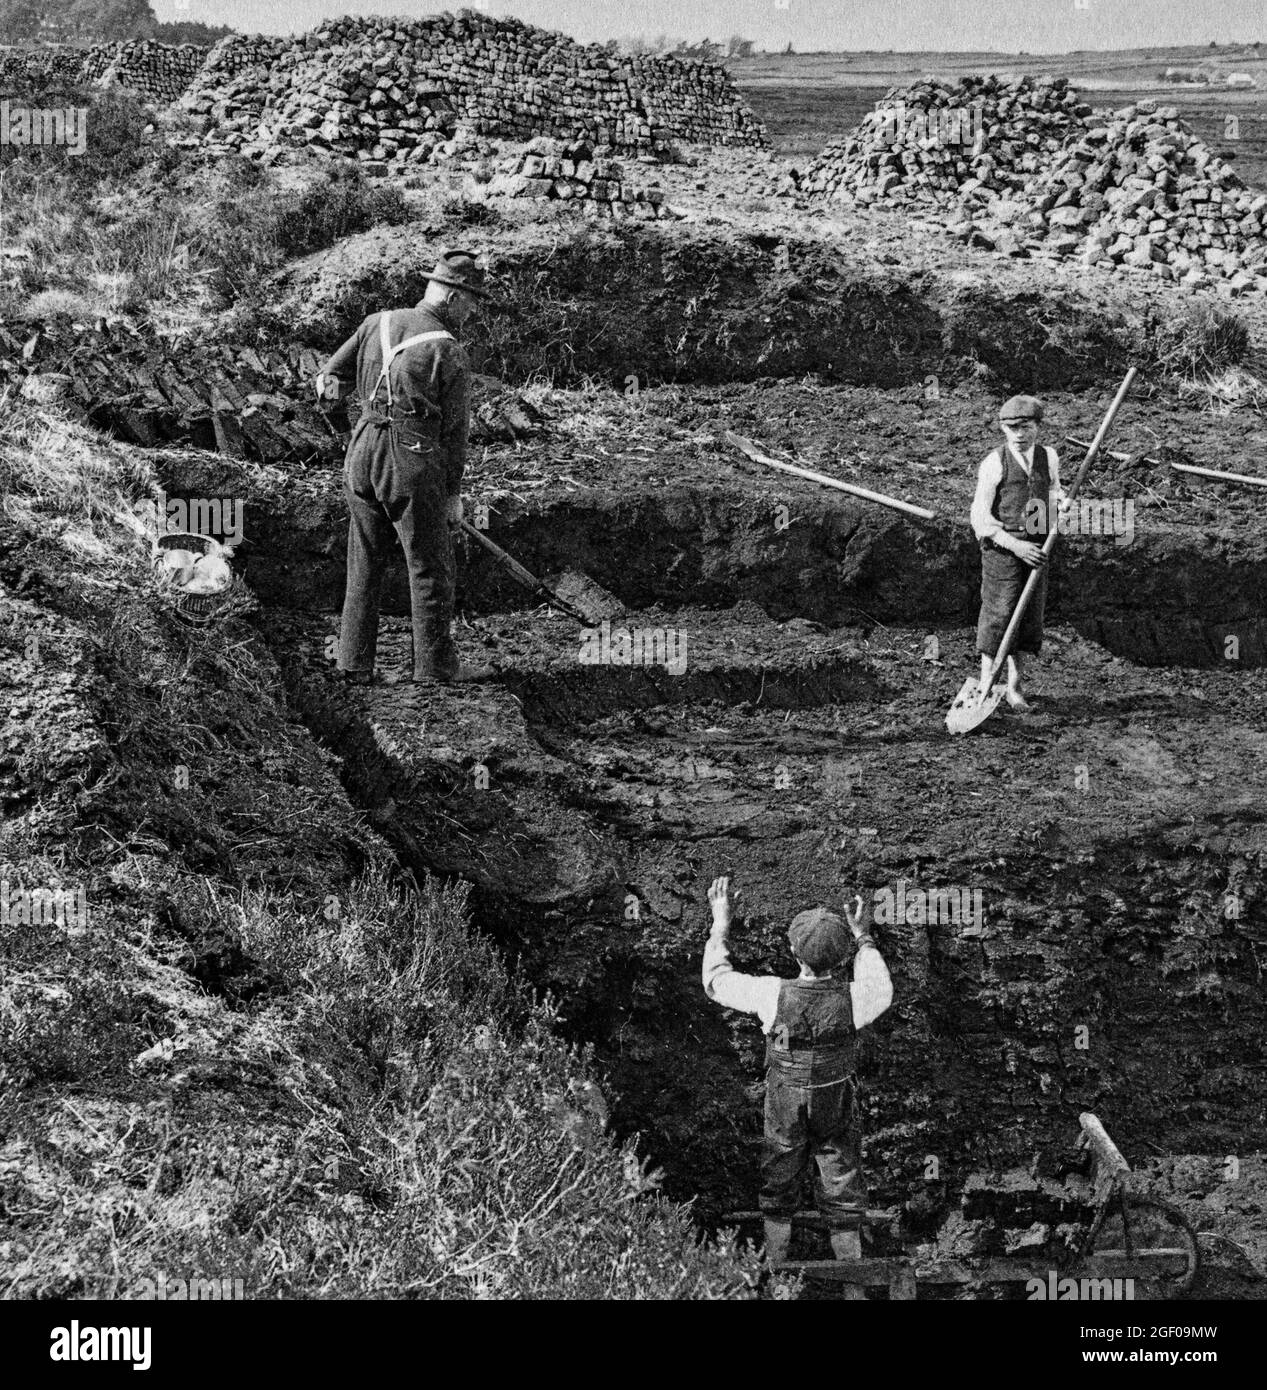 An early 20th century scene of a family cutting turf (or peat) in the blanket Bog of Allan in County Kildare, Ireland Stock Photo